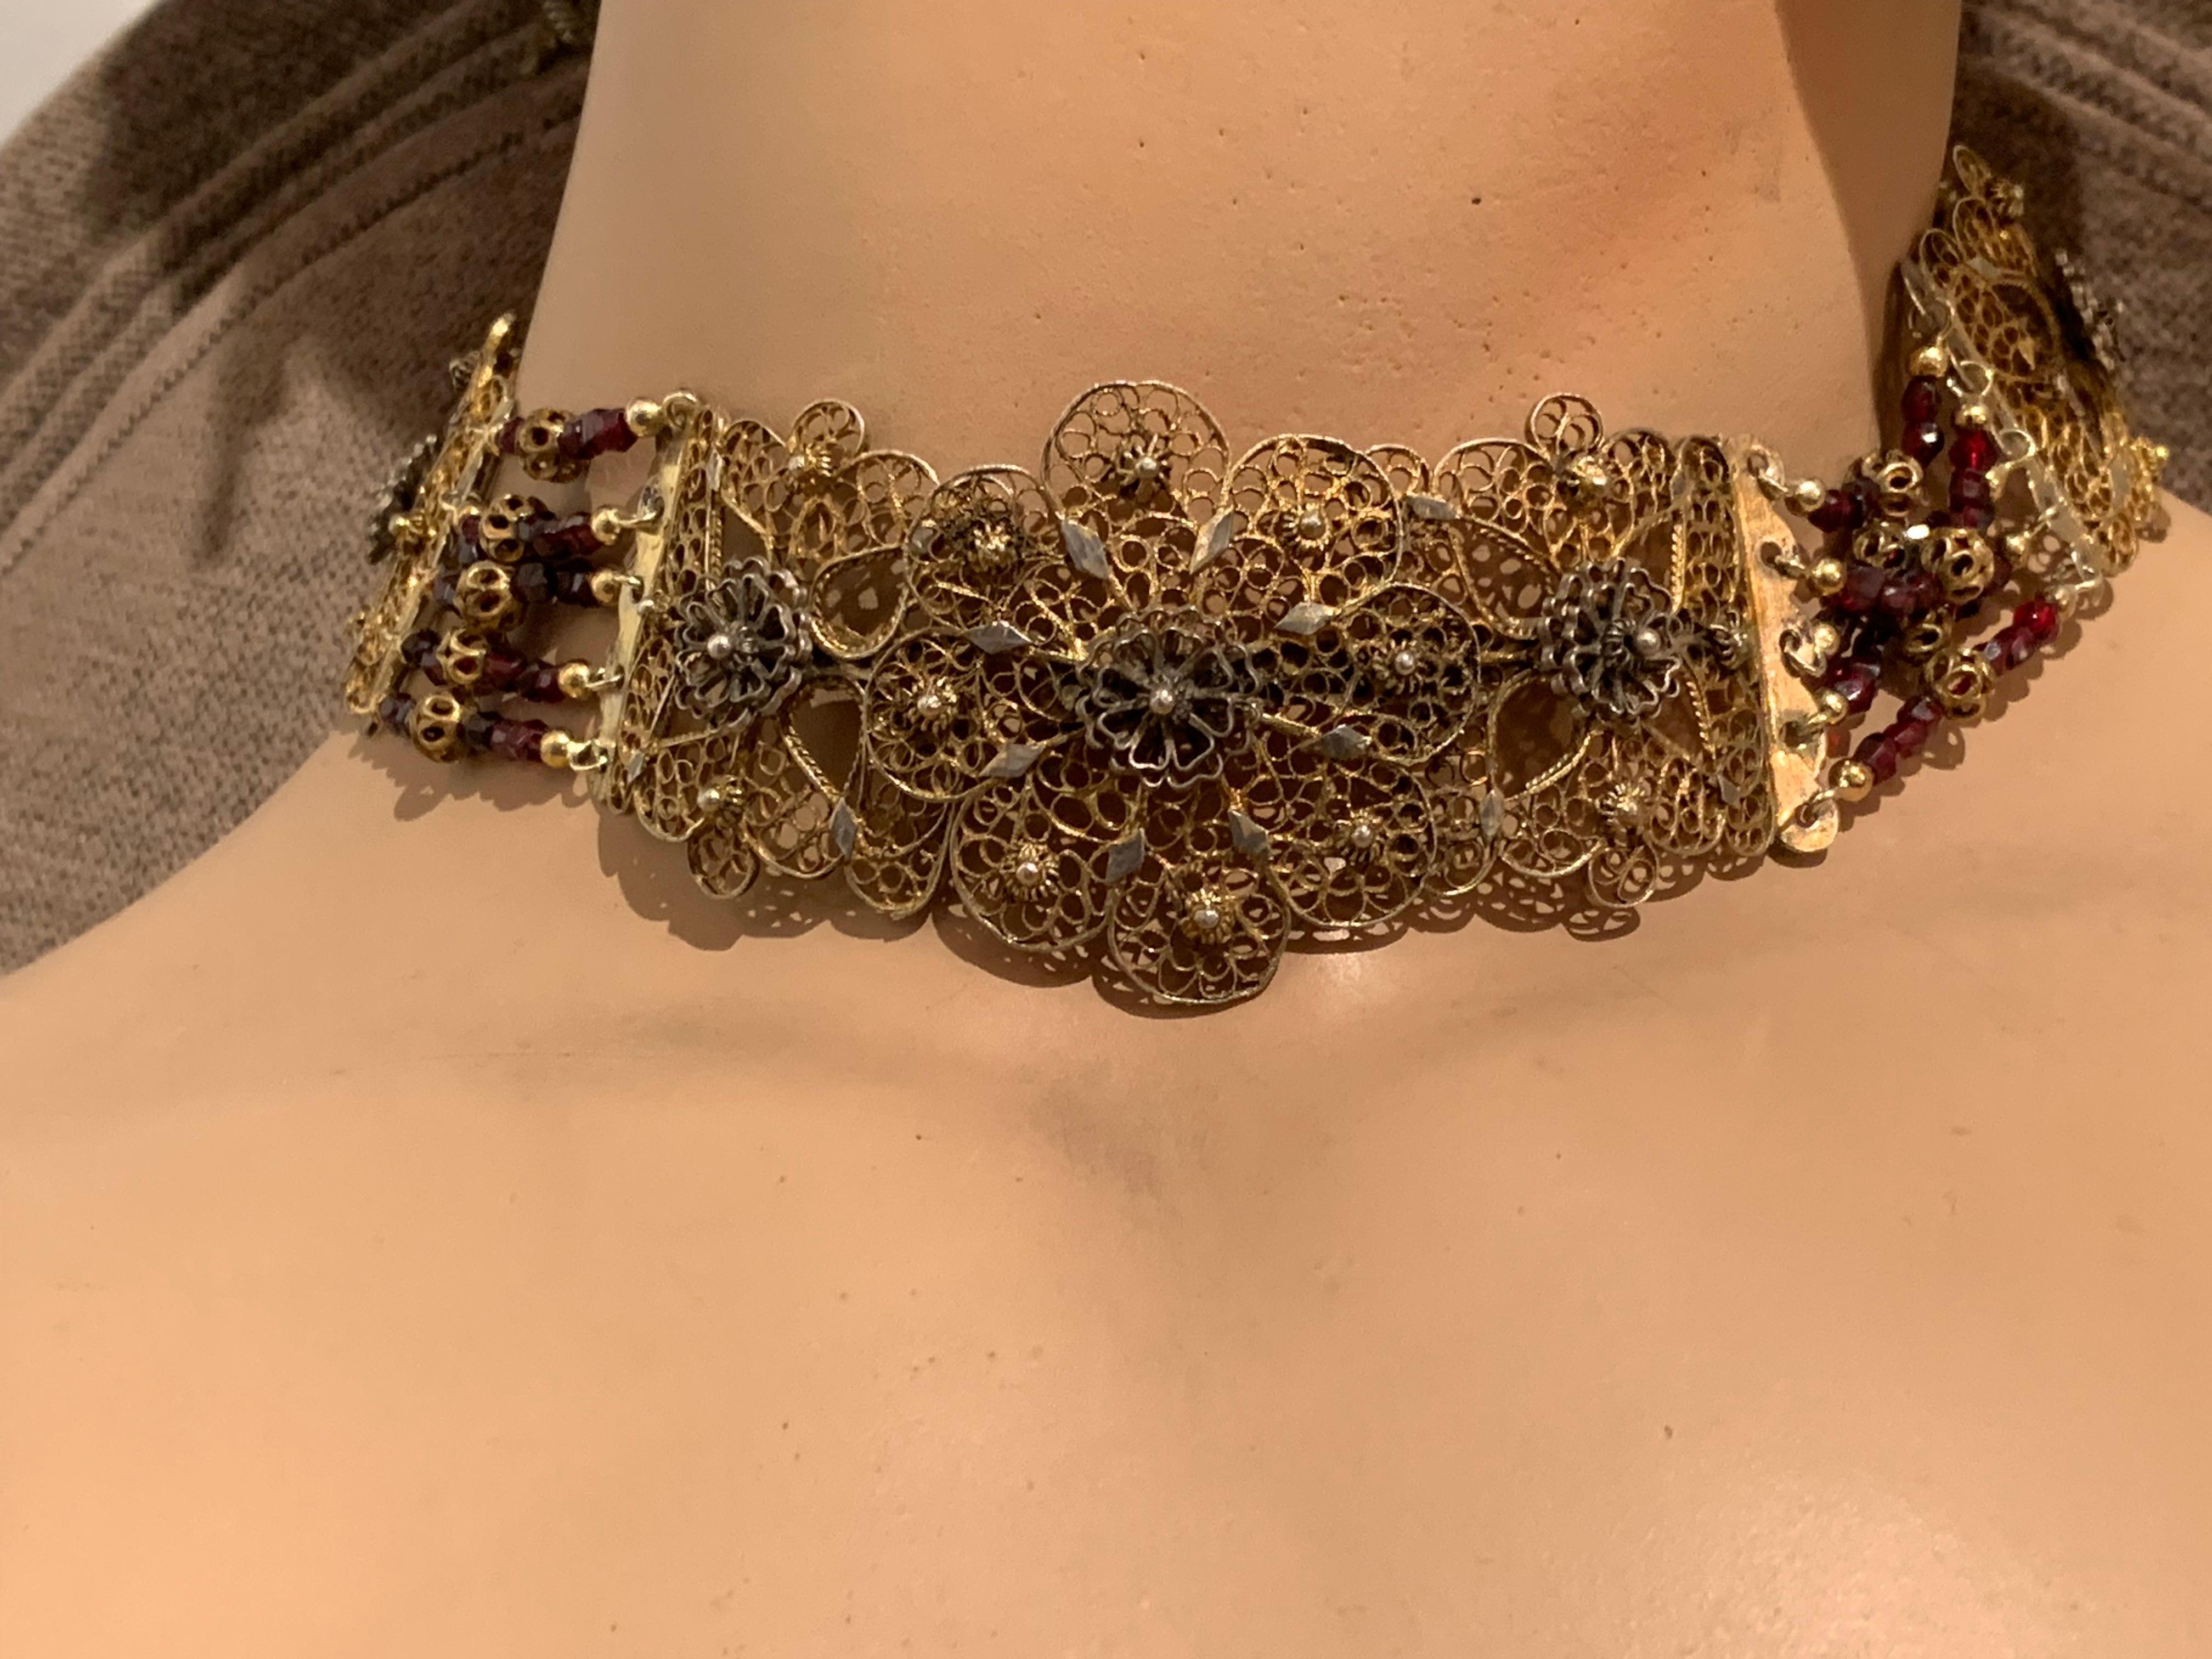 Late 18th century garnet and silver filigree choker that fastens at the front with an ornamental clasp.  Six pierced panels with cut out flower motive are connected by five rows of facetted garnet beads. Each row of beads fearures a bead, made out